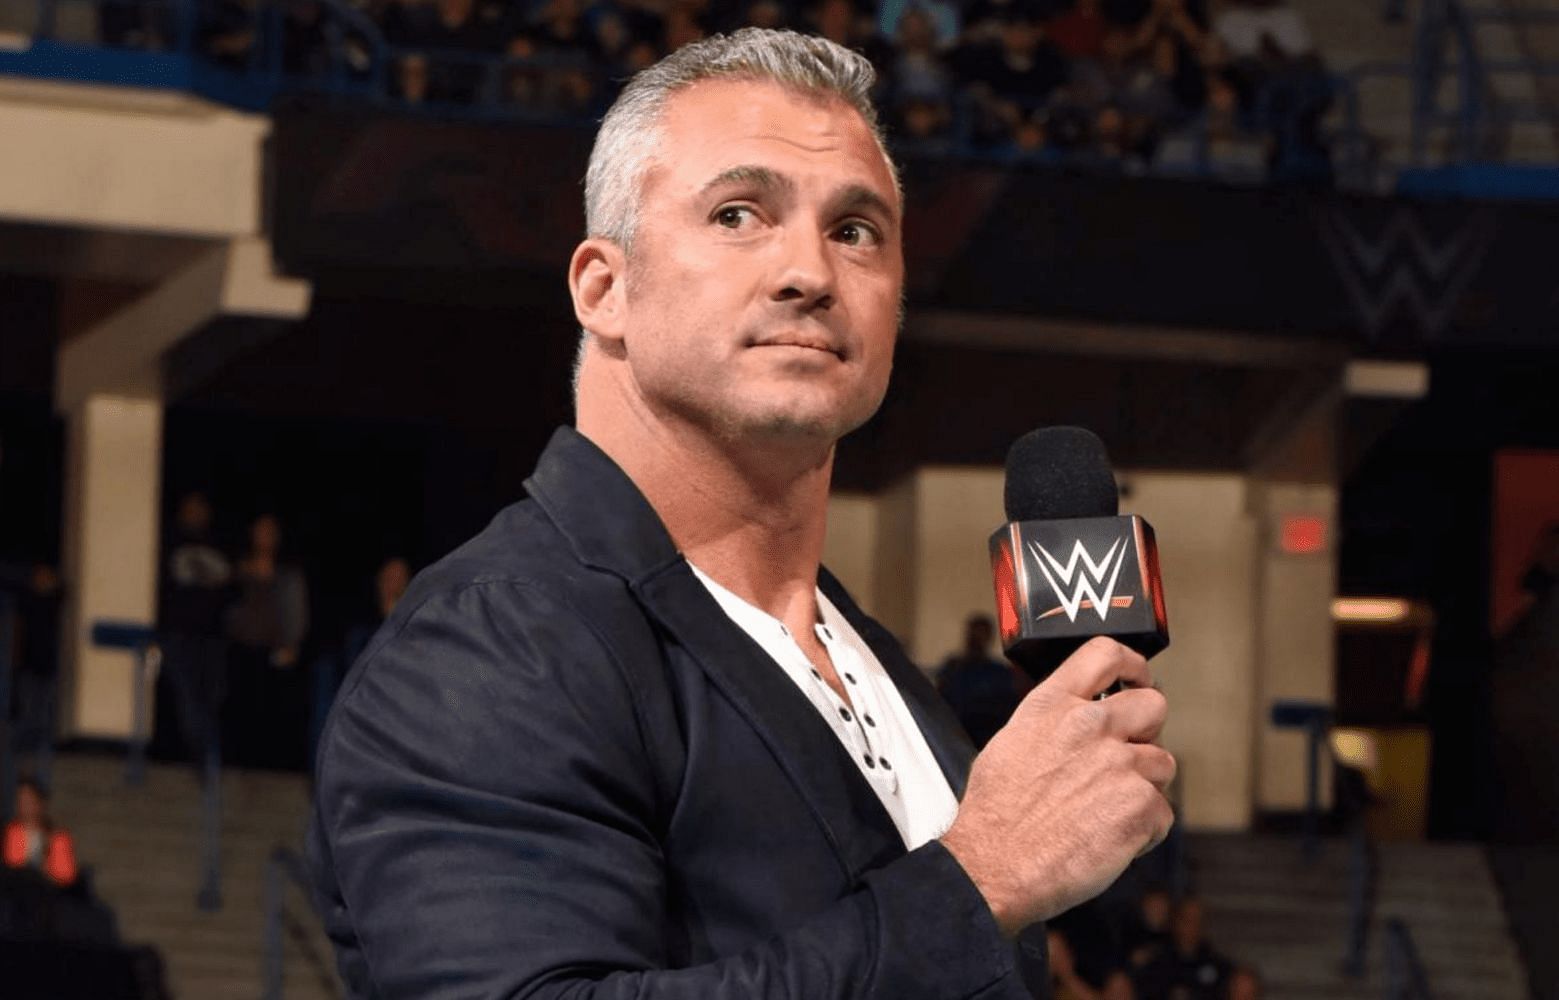 Shane McMahon has all the tools to make WWE interesting